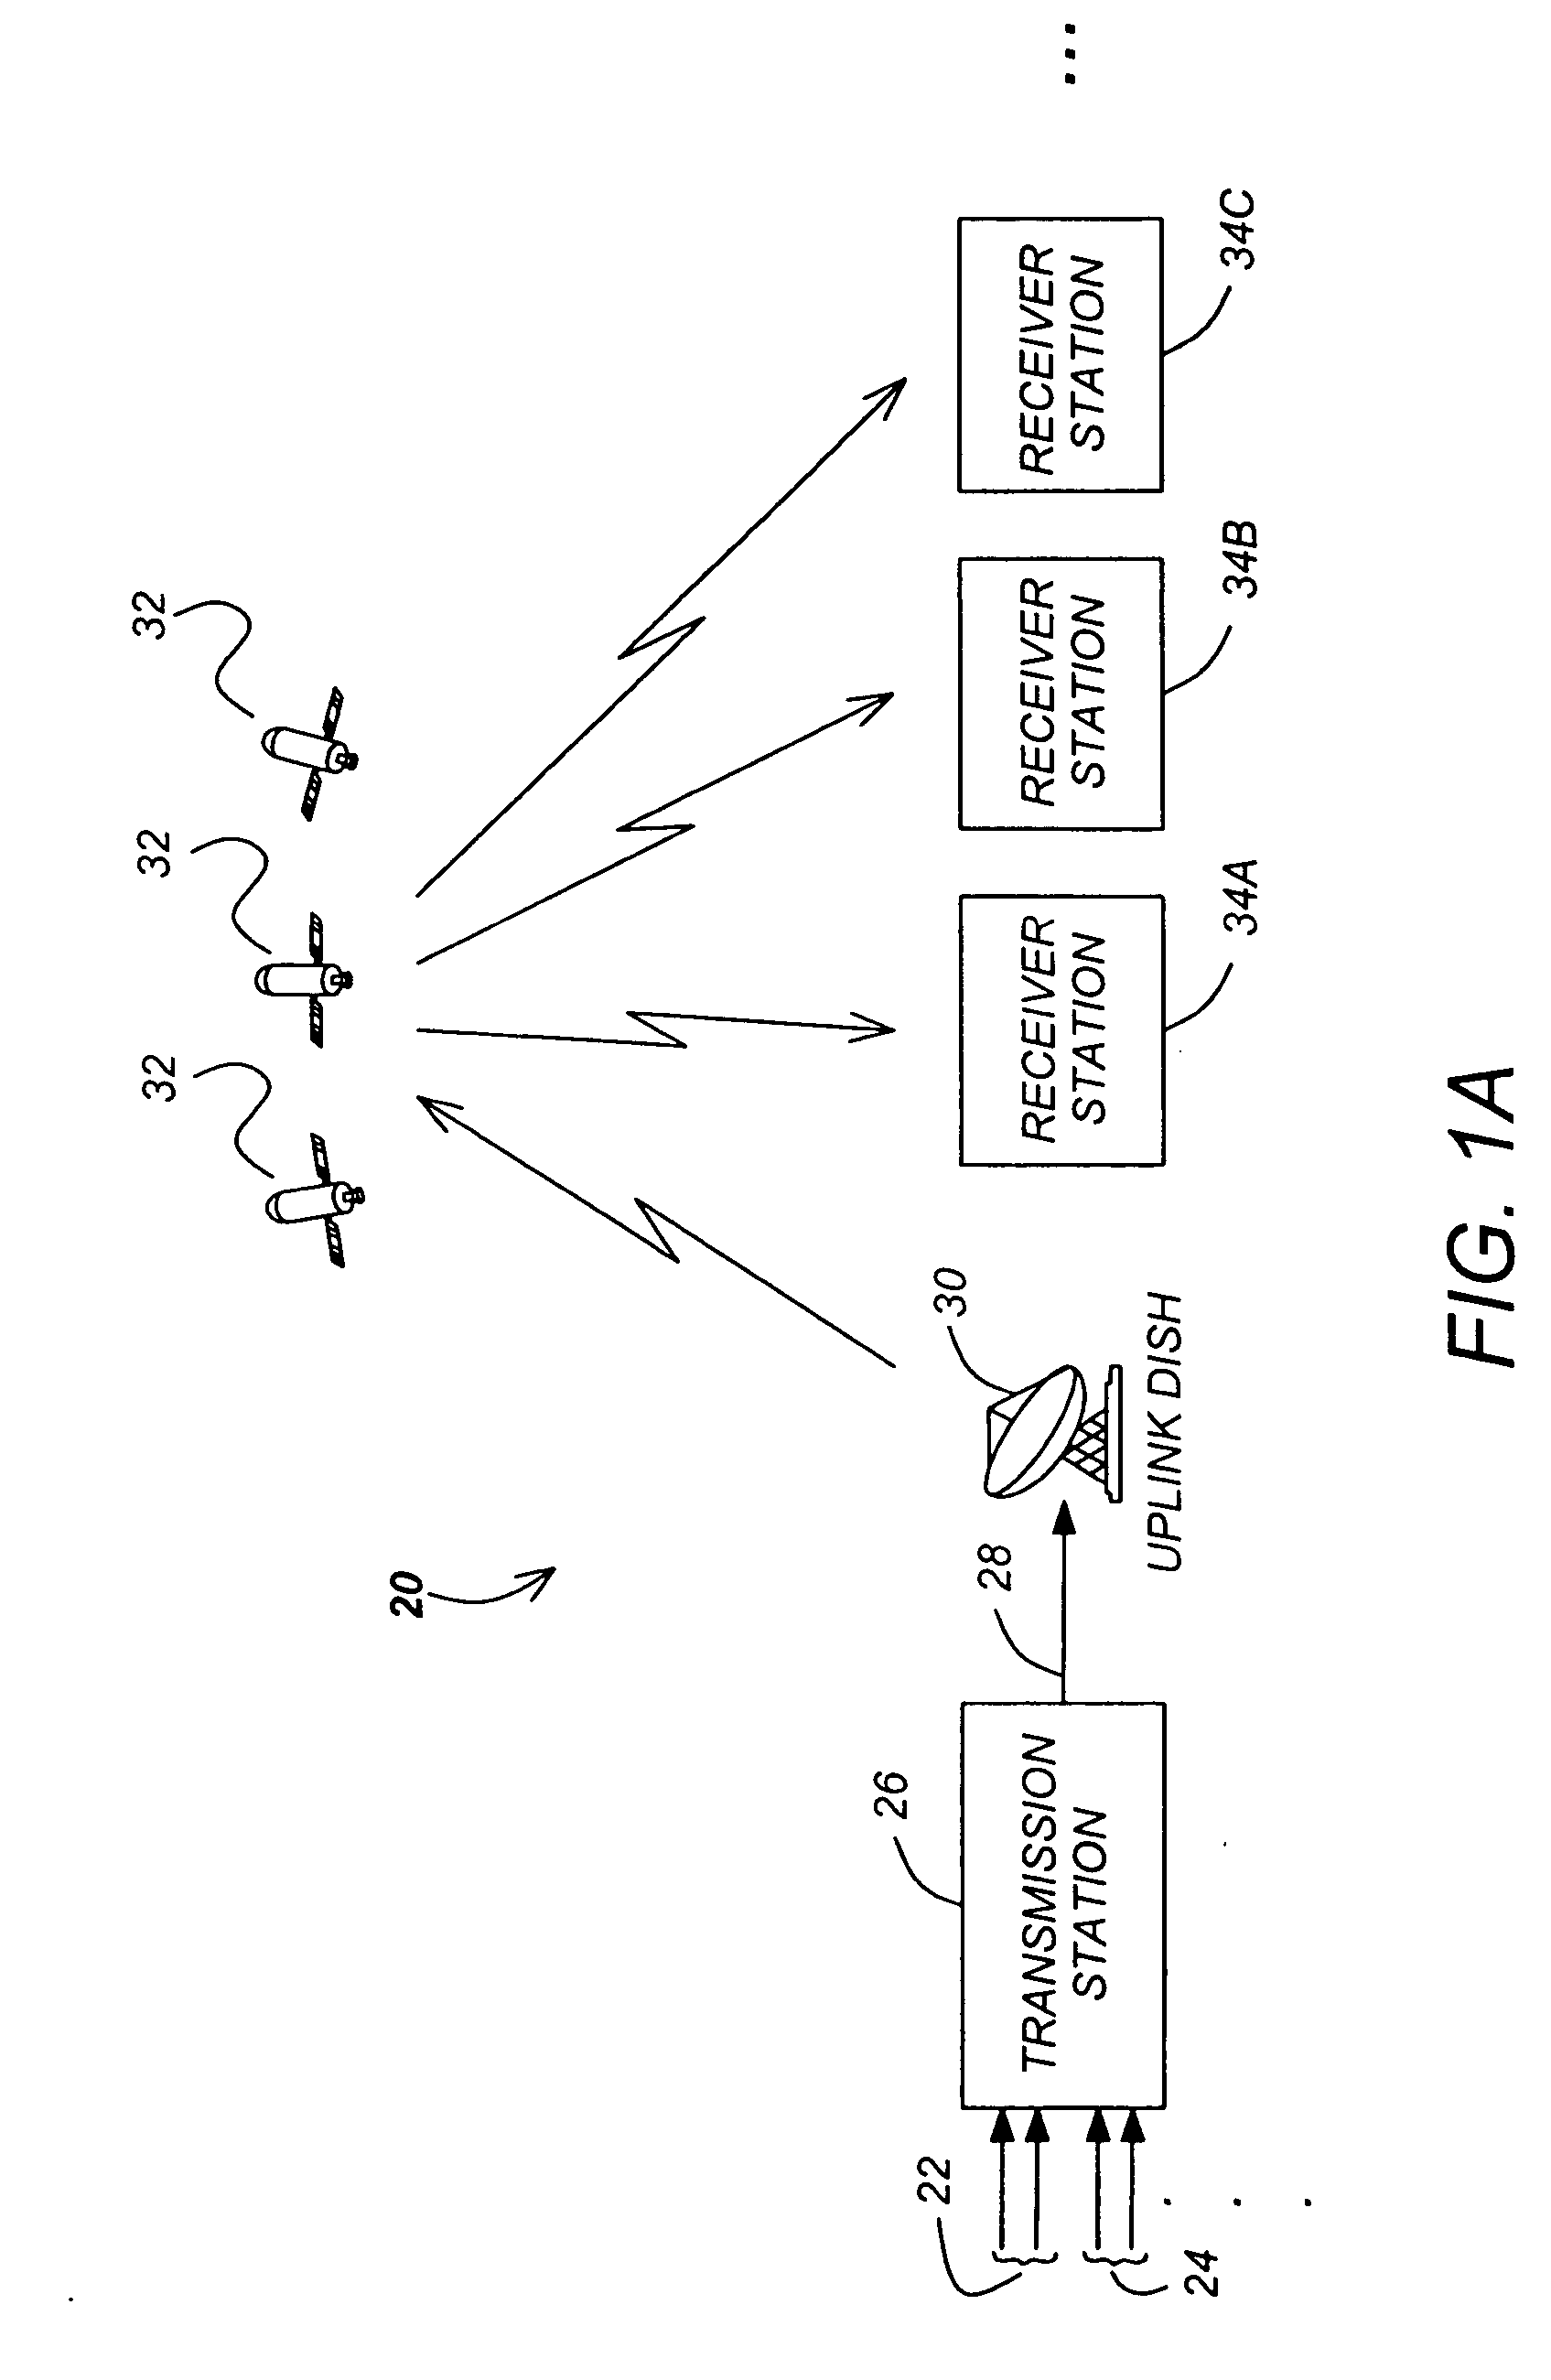 Methods and apparatuses for minimizing co-channel interference